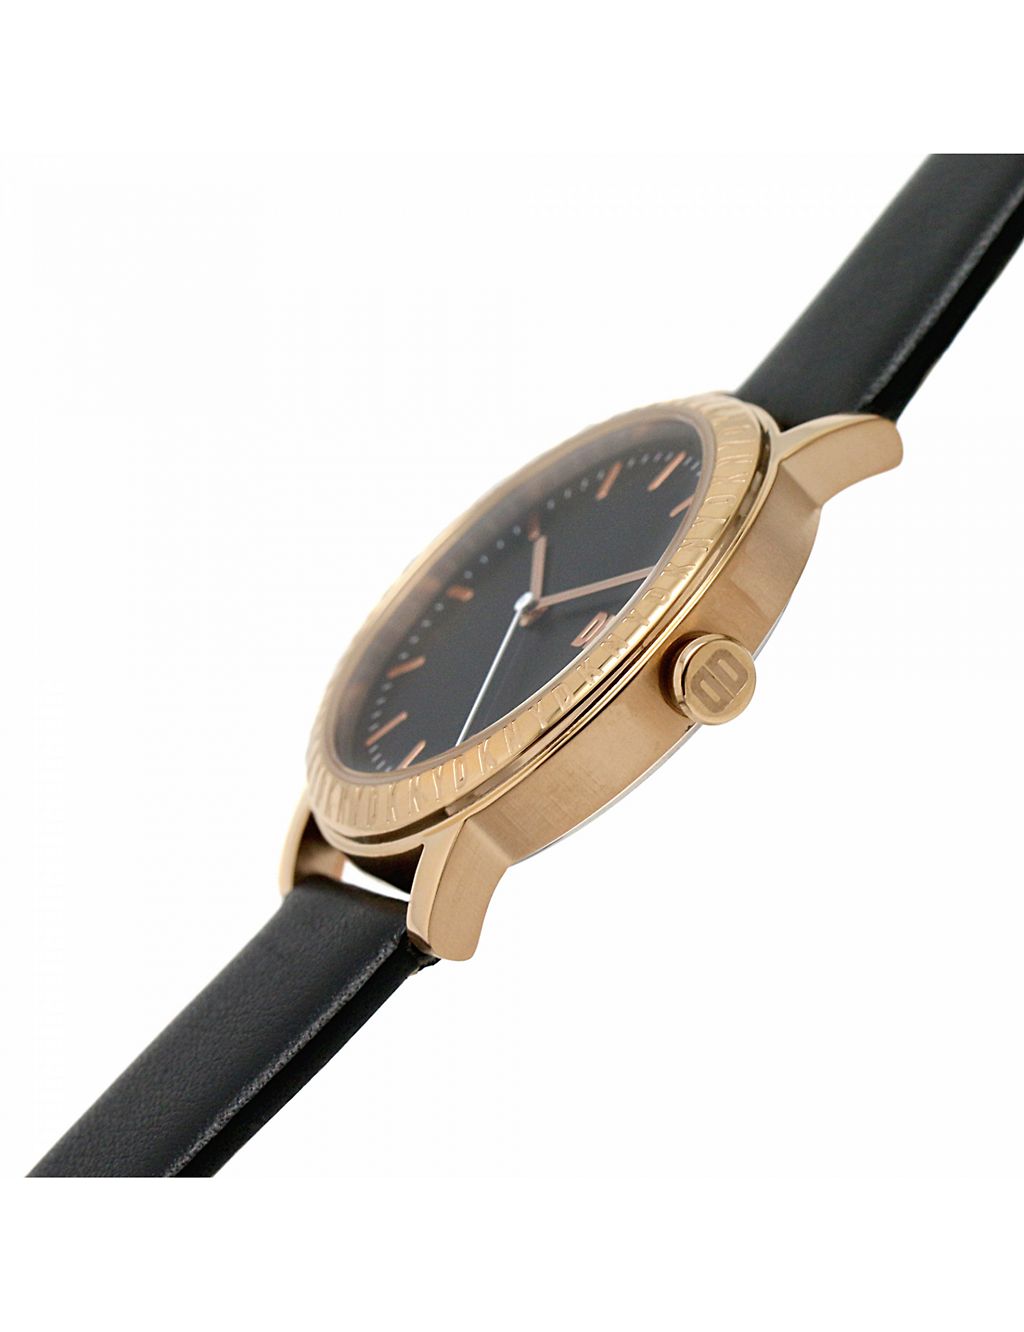 DKNY 7th Avenue Black Leather Watch 8 of 10